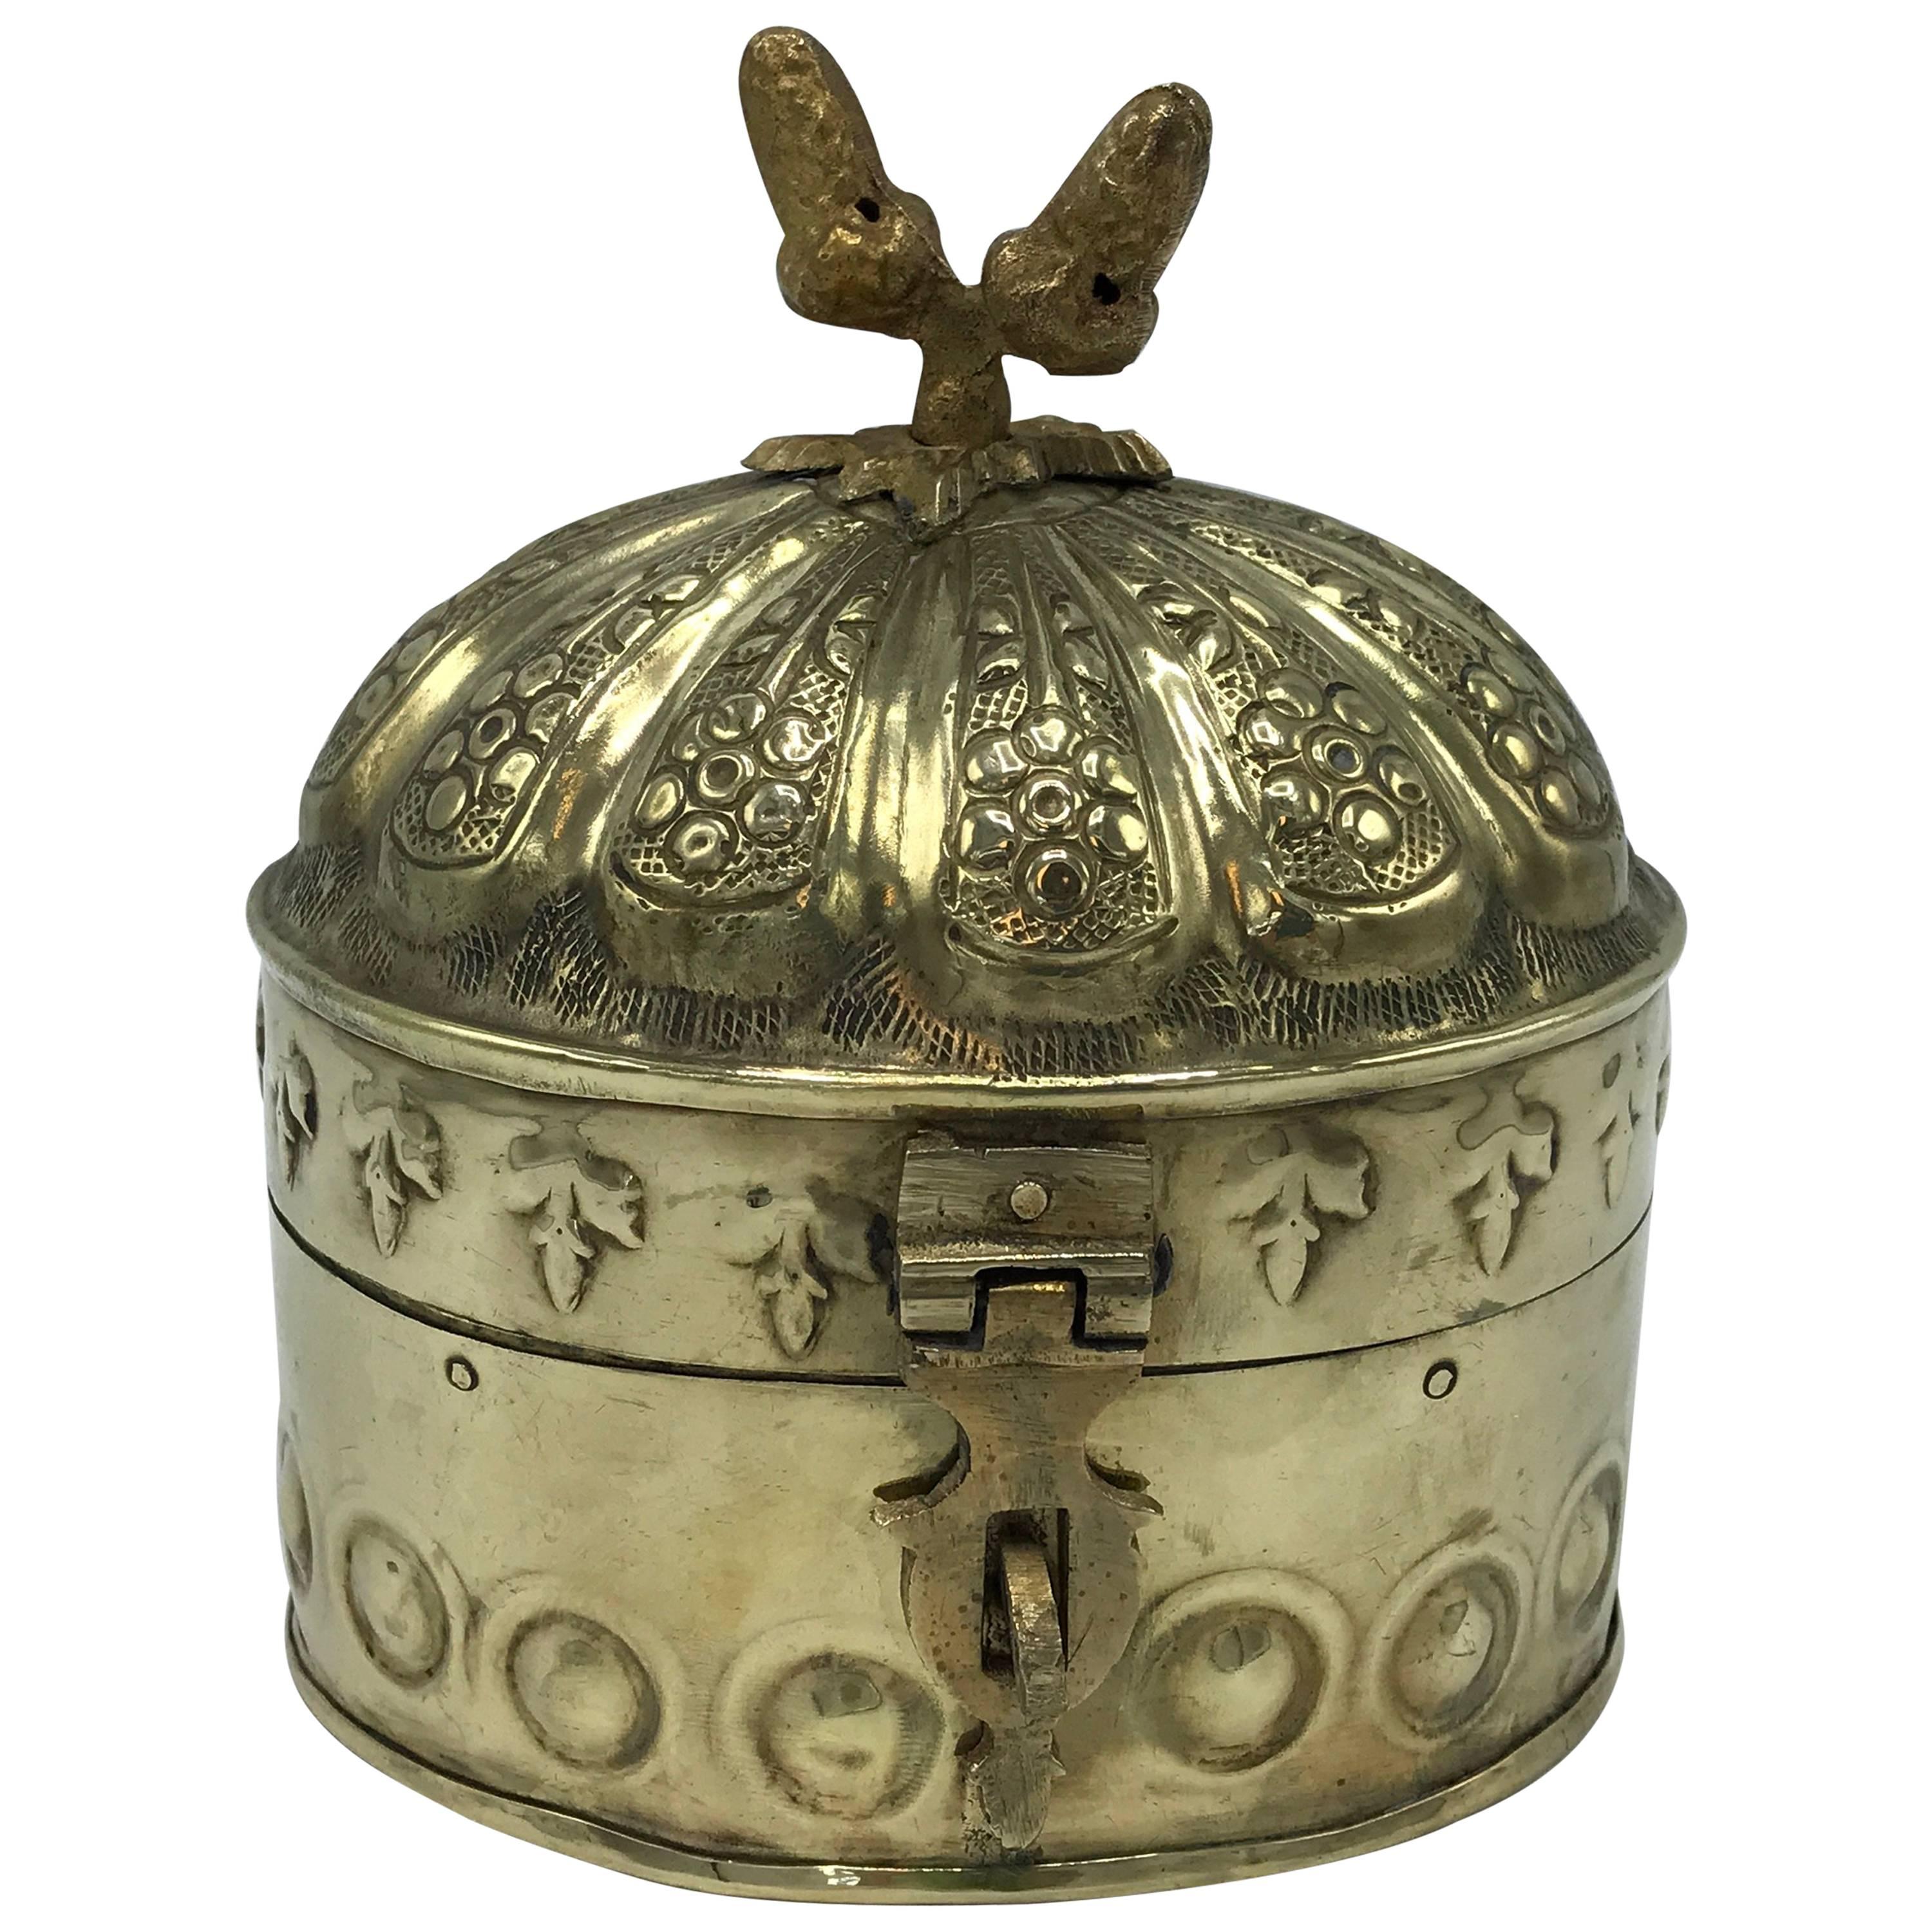 1960s, Brass Canister with Ornate Detailing